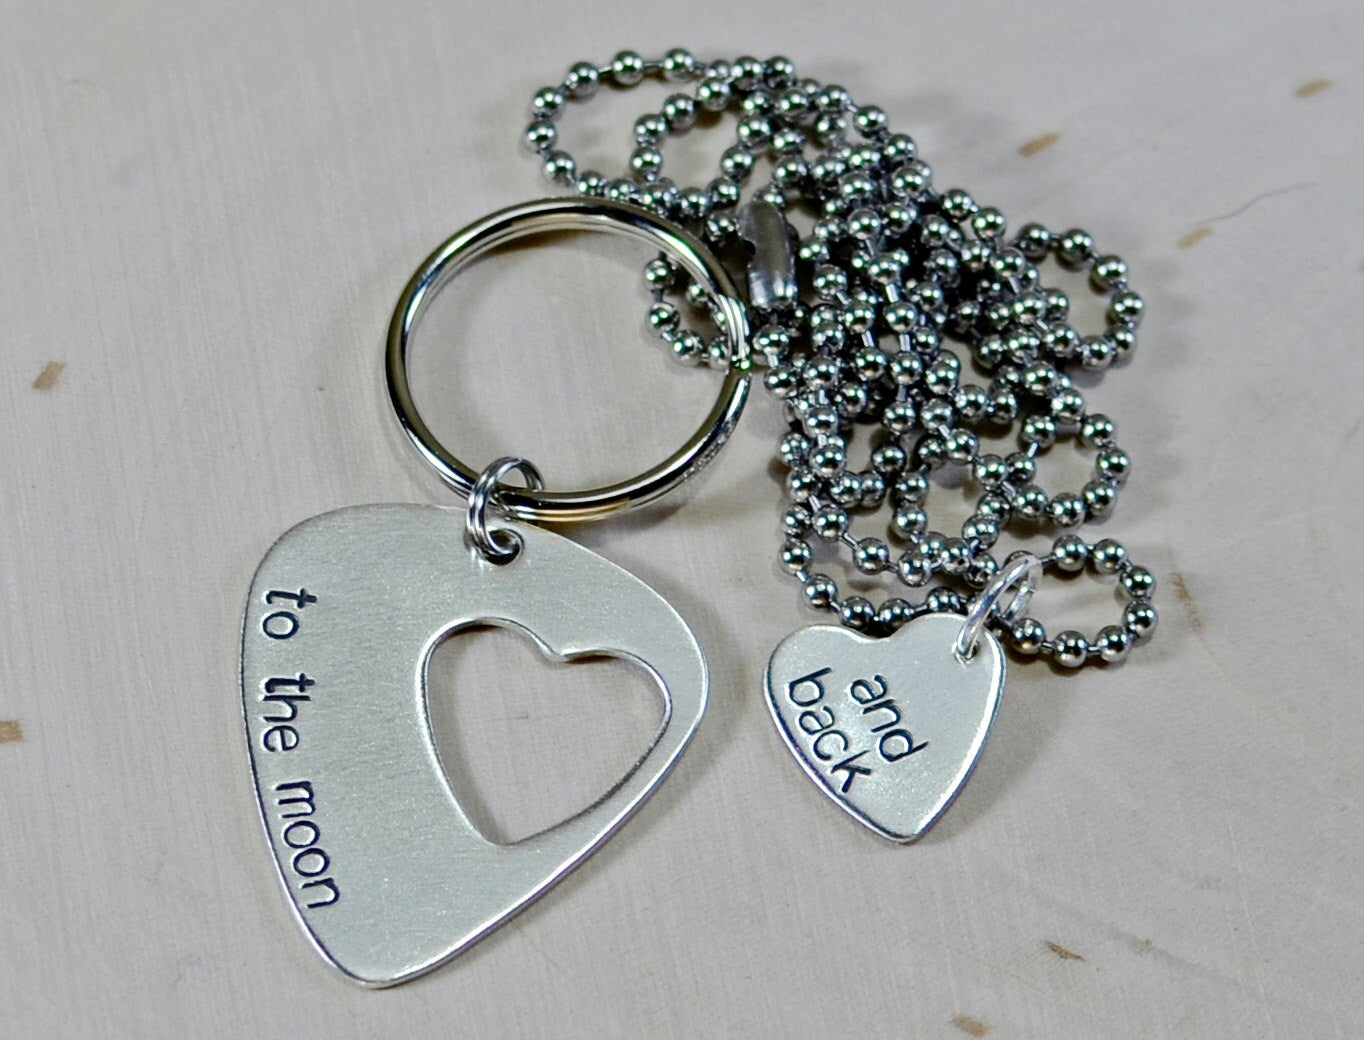 Couples sterling silver guitar pick keychain and necklace with love to the moon and back